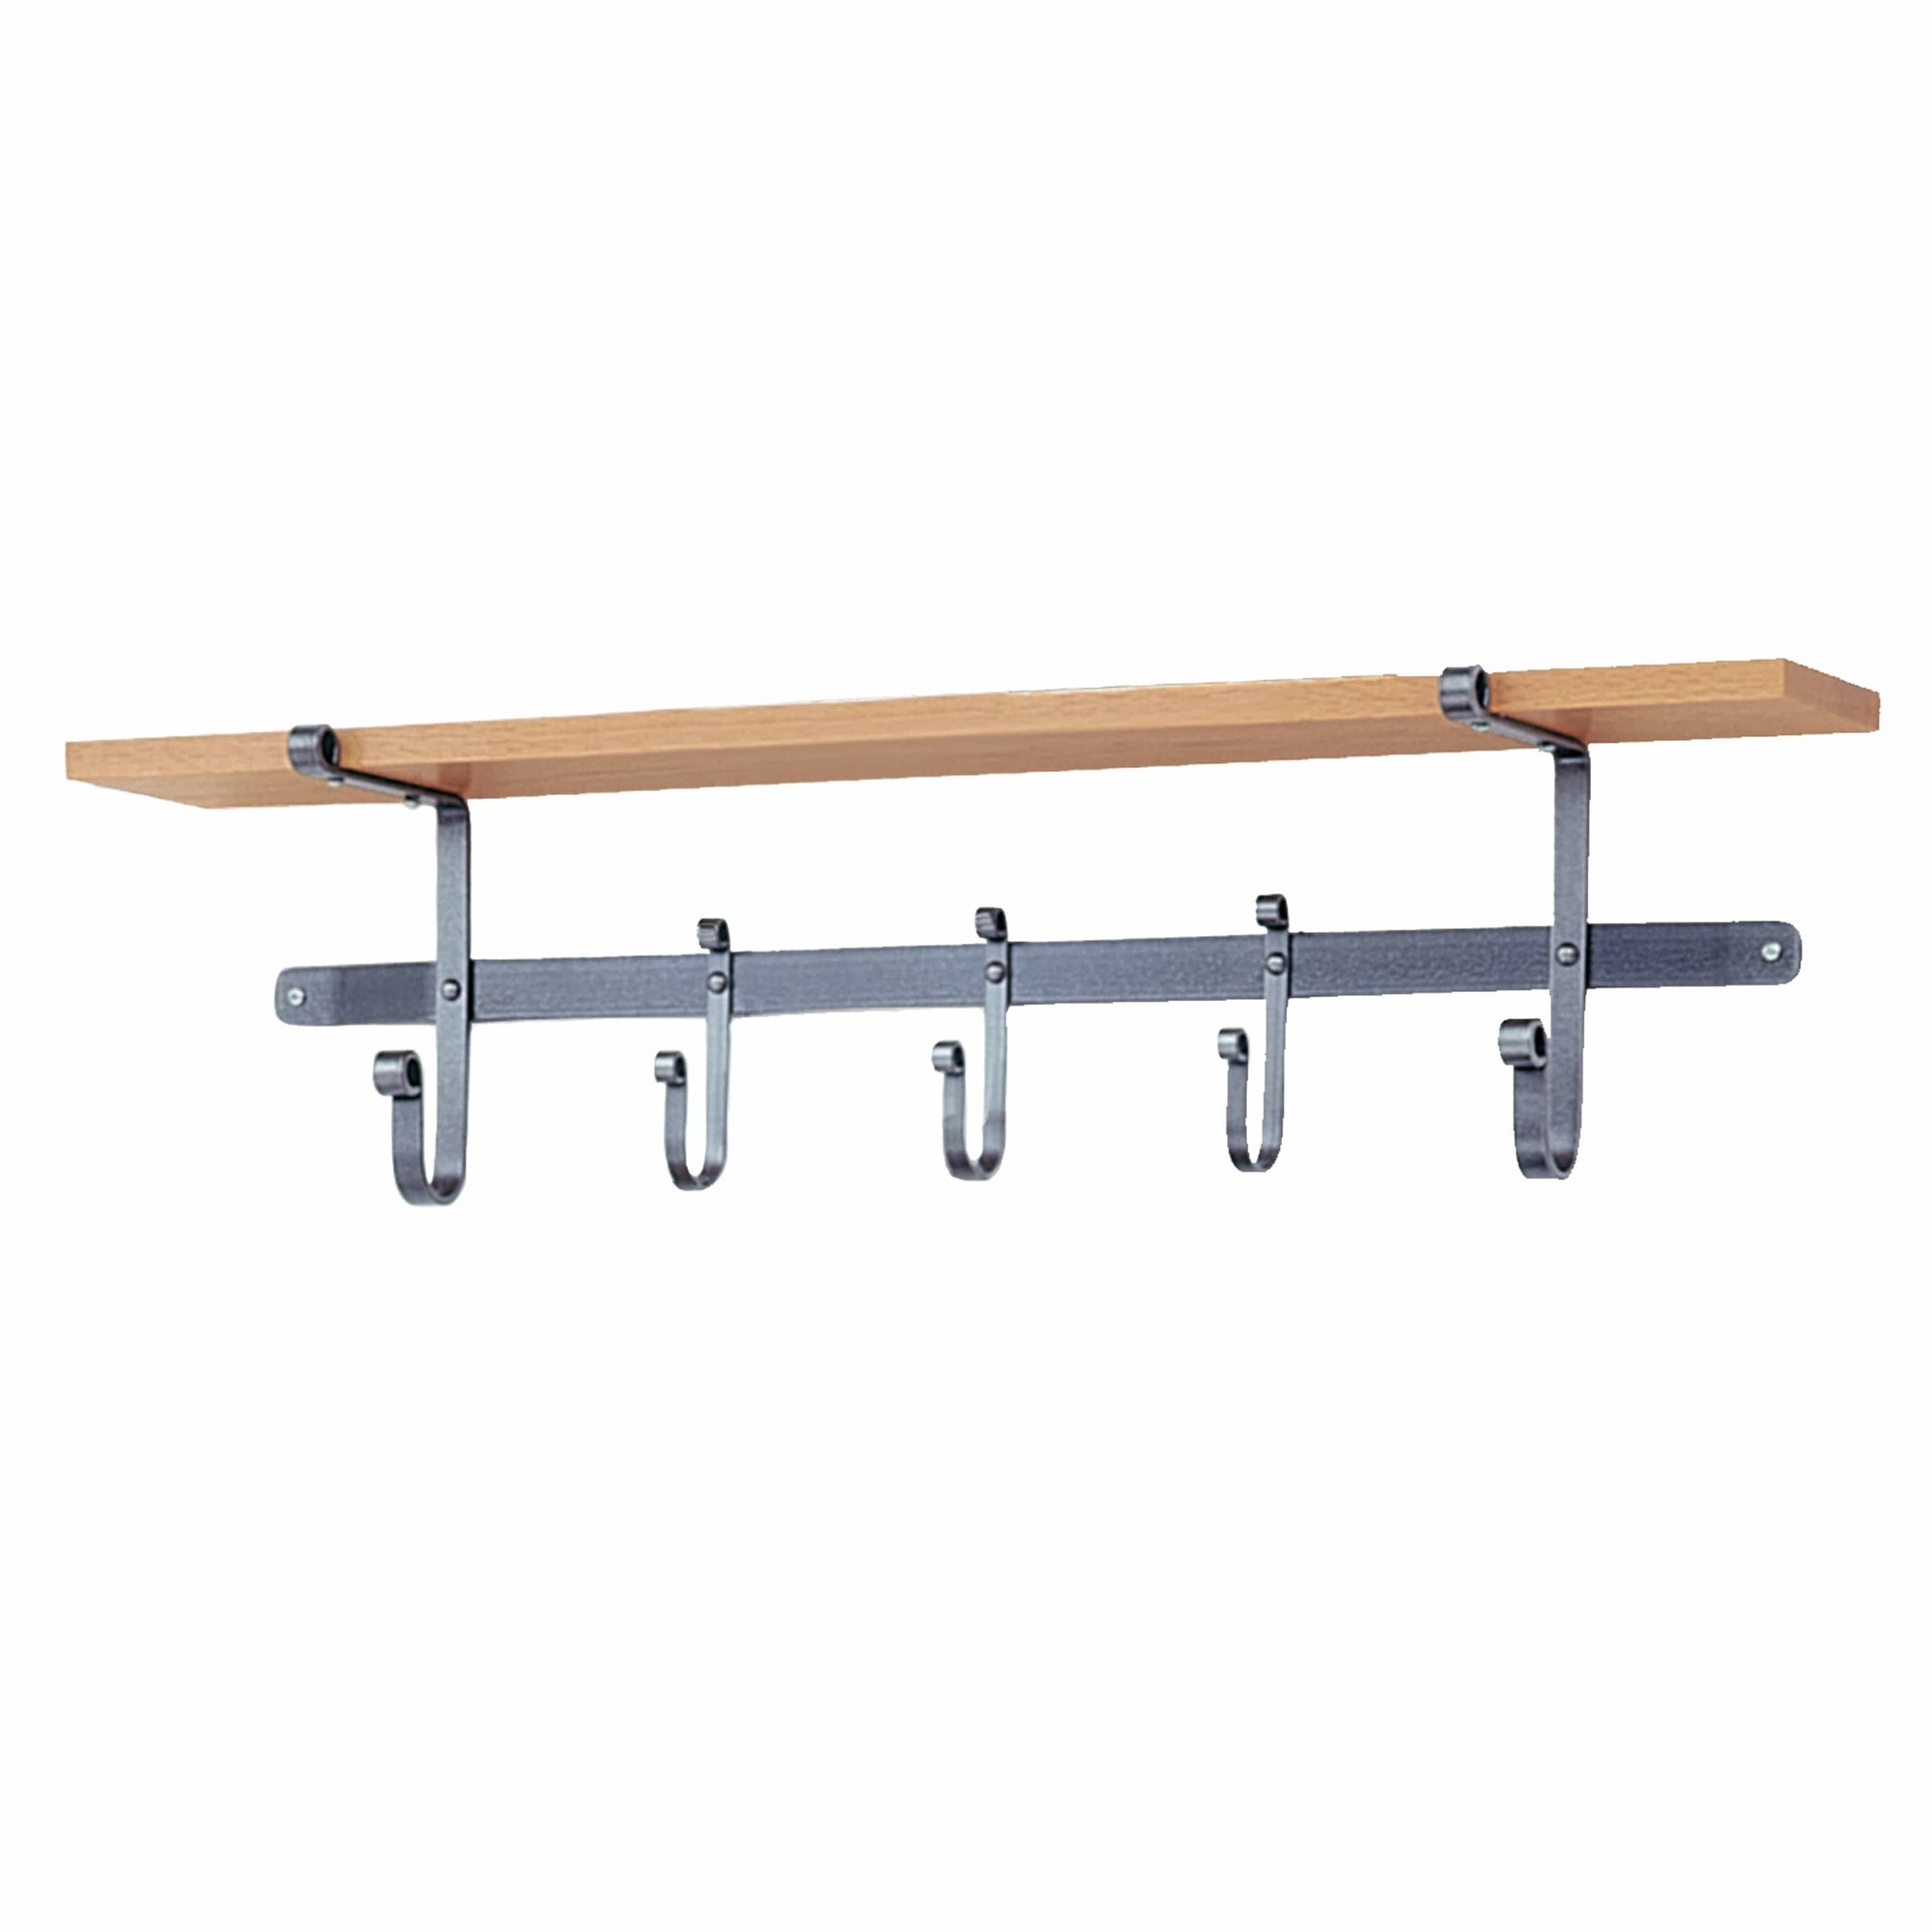 36 Classic Metal Wall Hook Rack Black Finish - Hearth & Hand with